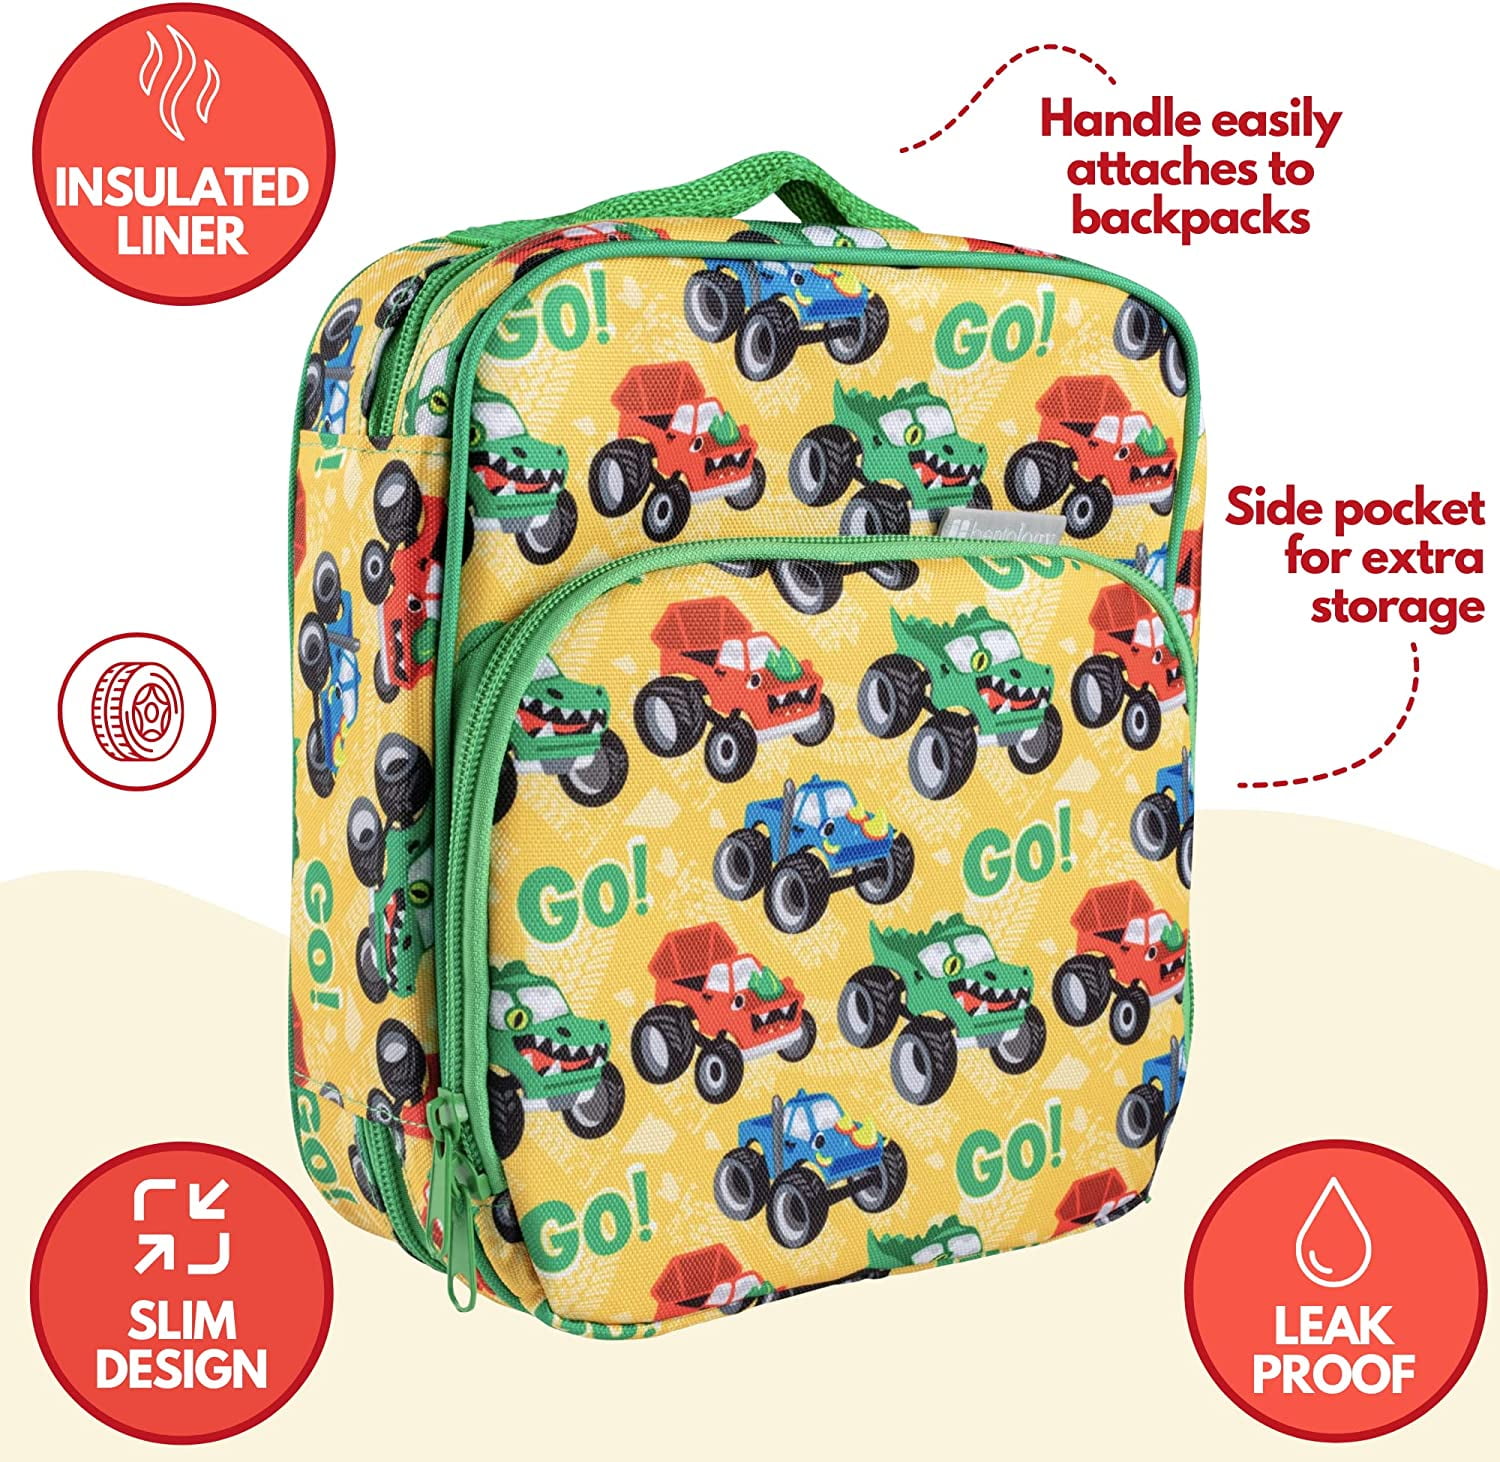 Bentology Insulated Lunch Box w Snack Pocket and Water Bottle Holder - Boys  Girls and Kid's Lunchbox Tote Keeps Food Hotter or Colder Longer - Bag Fits  Most Ben